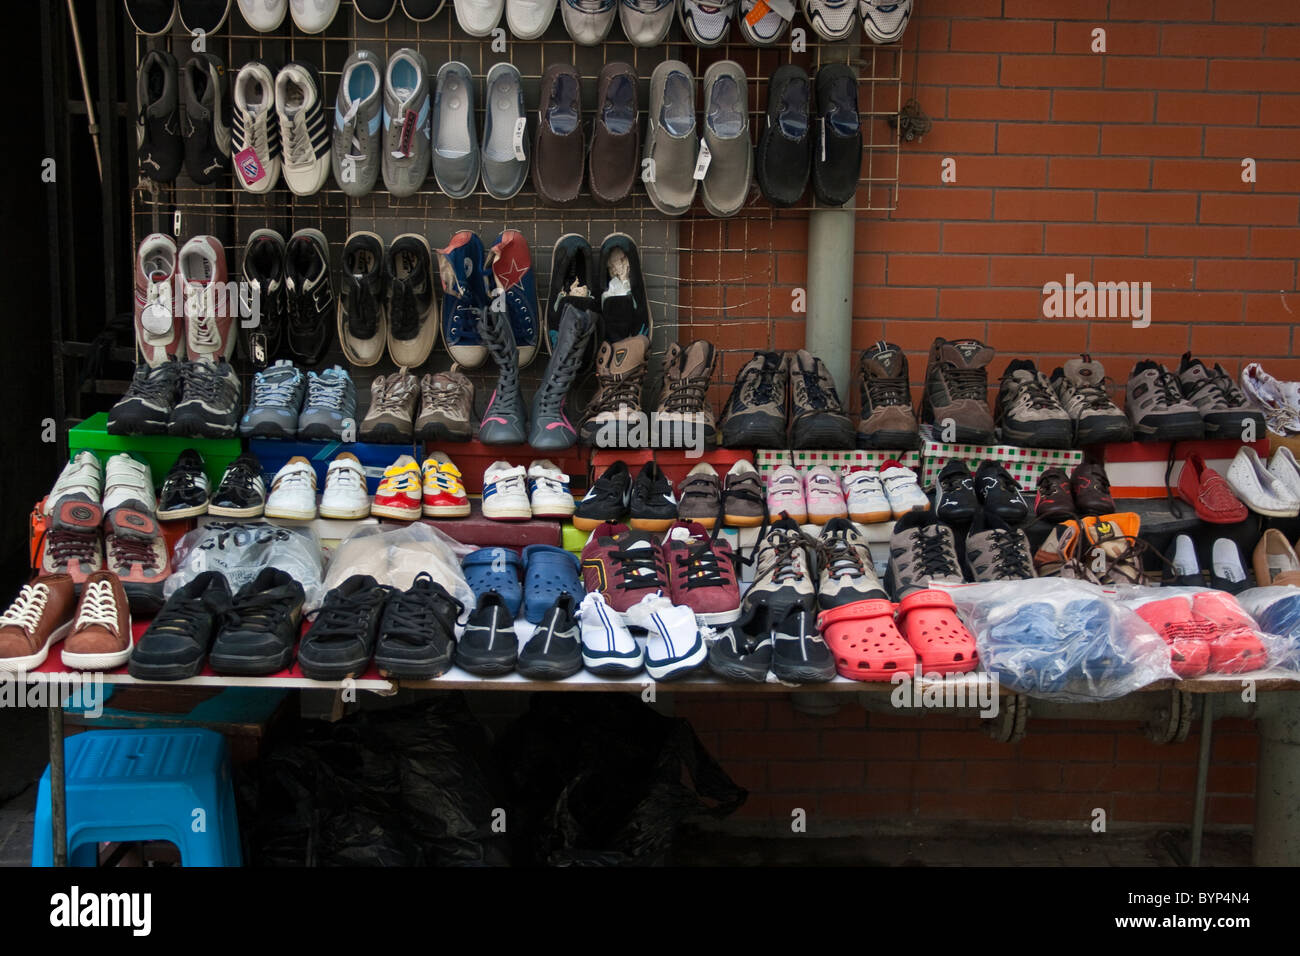 Shoes for sale on street market stall in Shanghai Stock Photo - Alamy